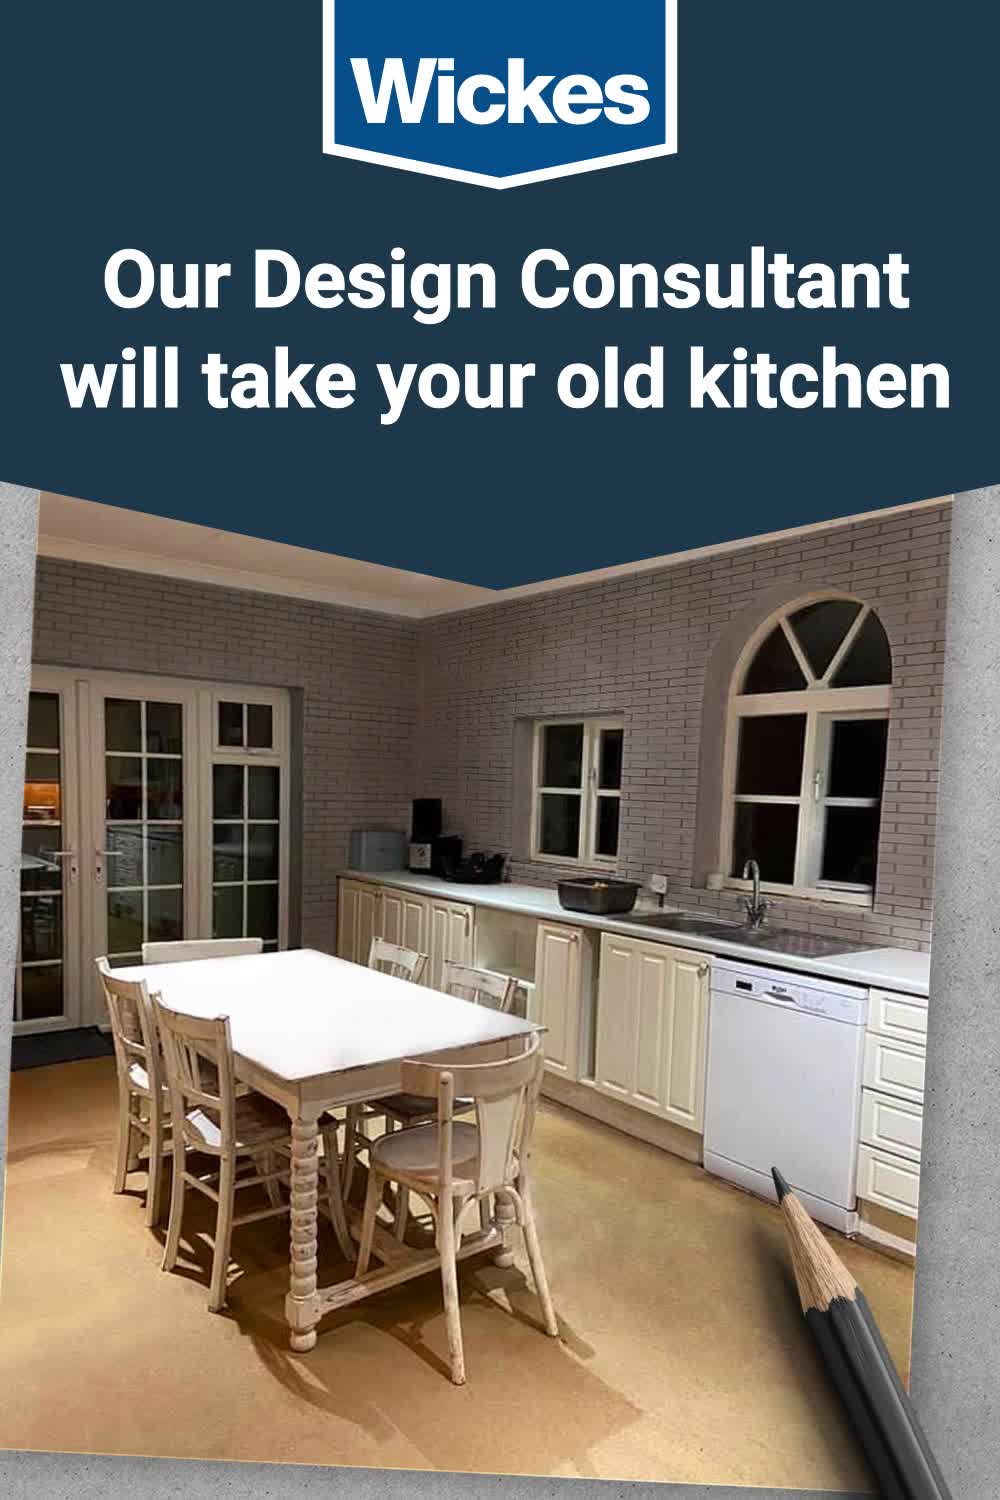 Wickes / Kitchen Awareness and Consideration Ads